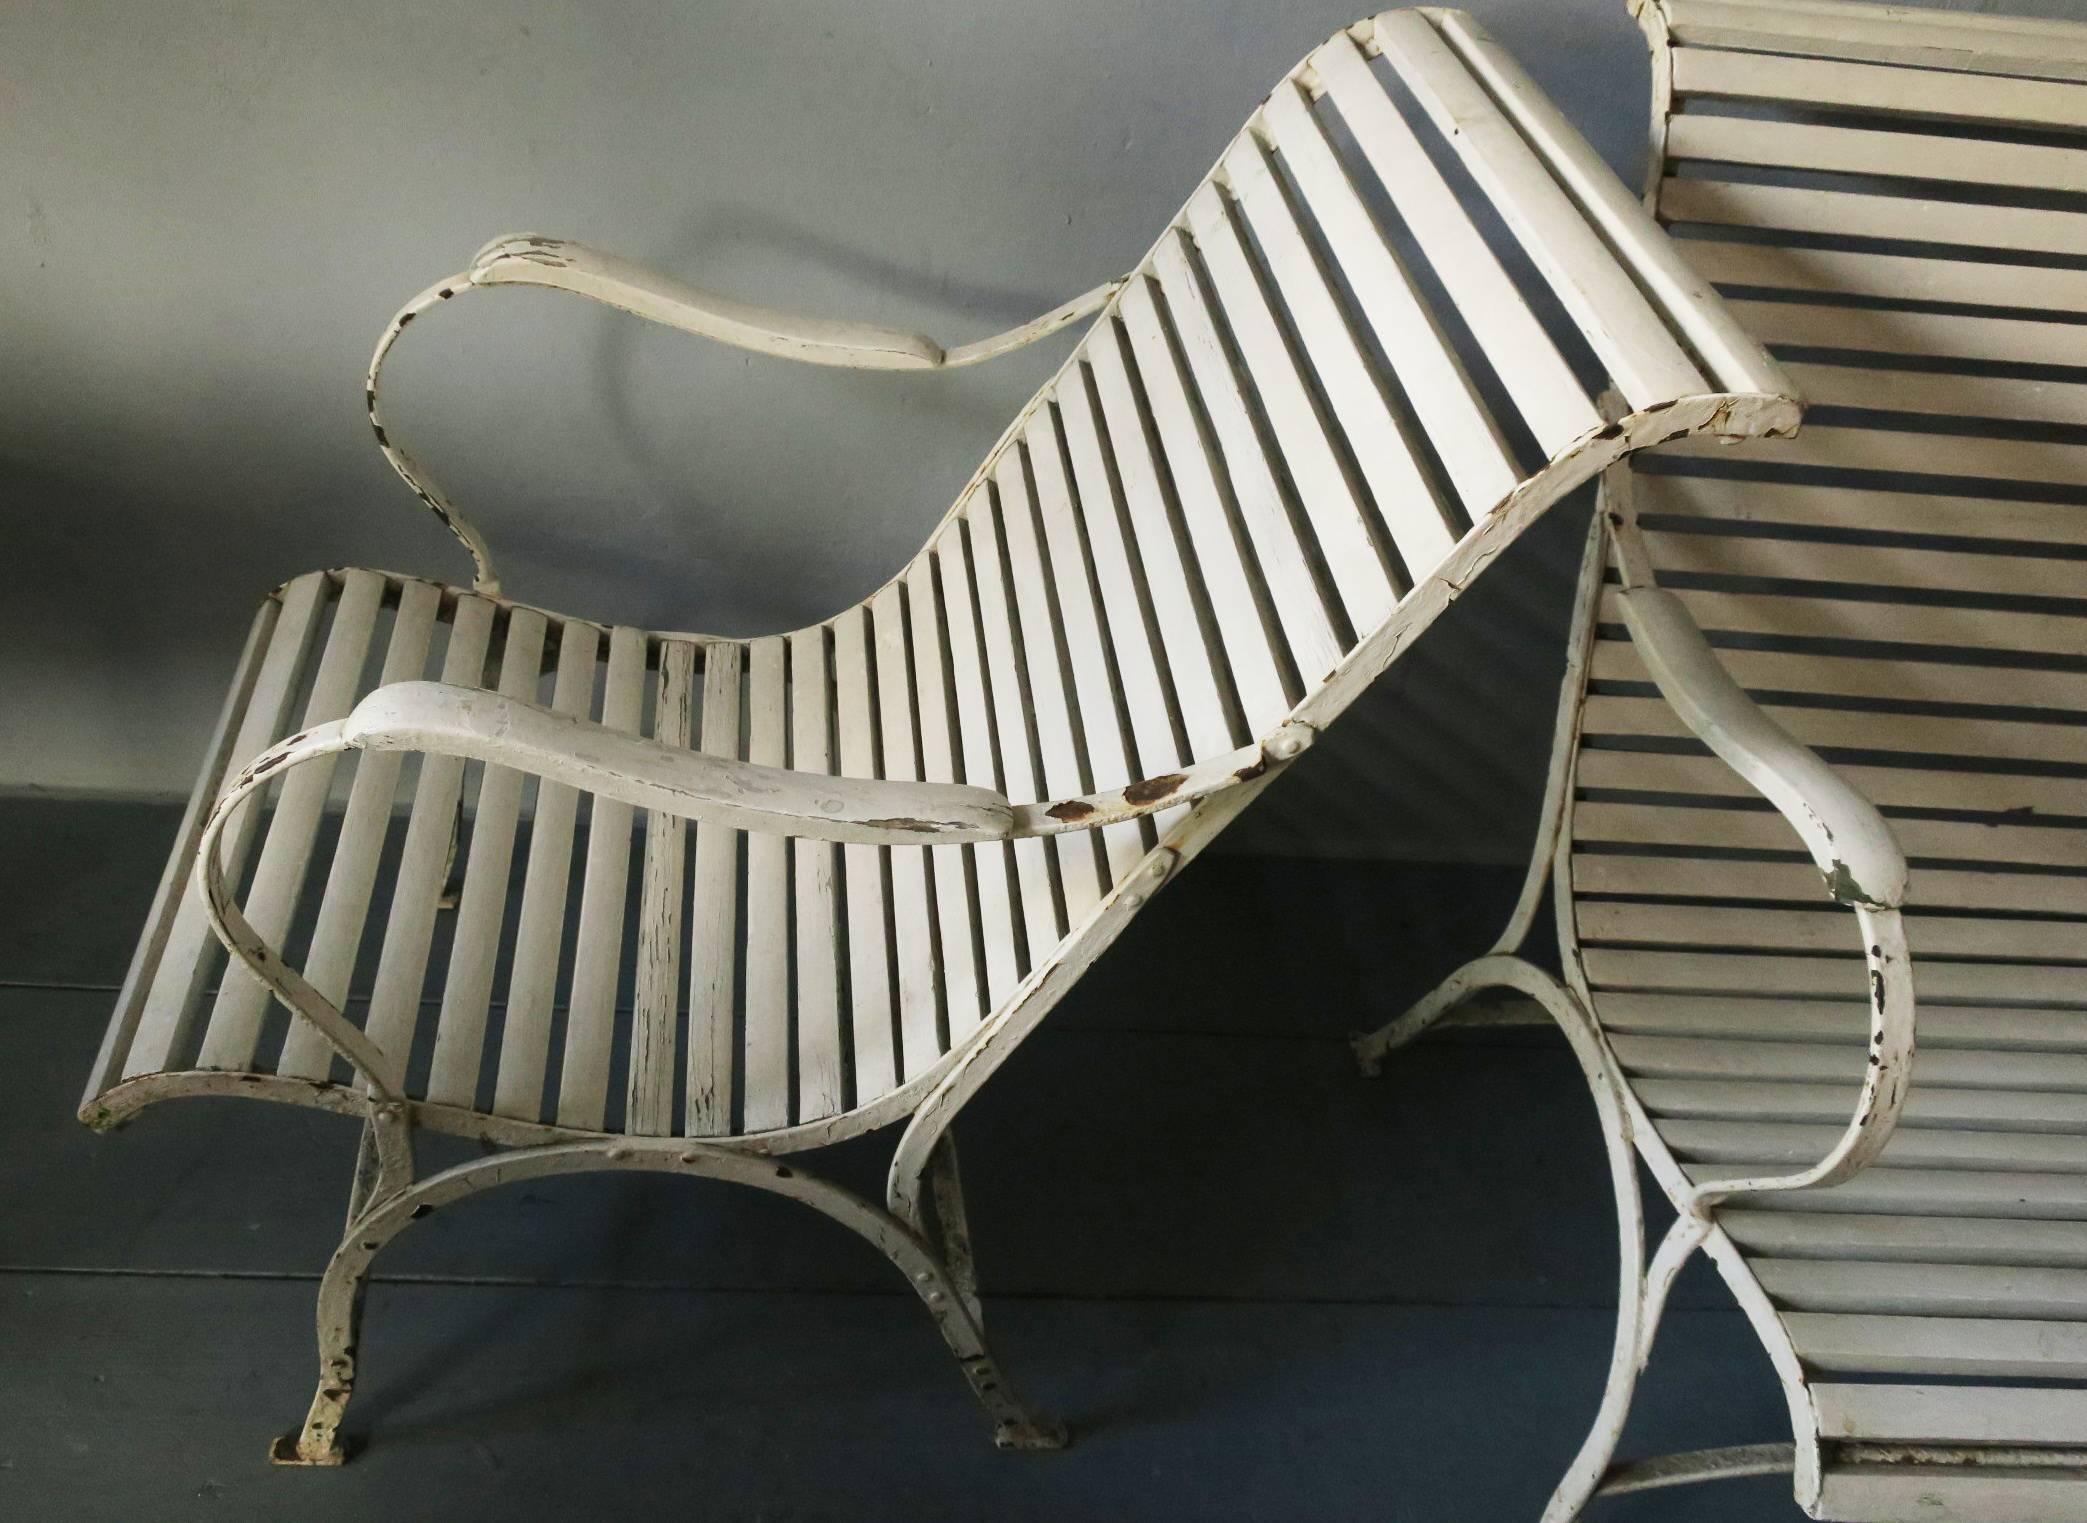 Pair of painted iron patio or garden lounge chairs, Germany, early 20th century.

The chairs have an iron frame with wood slats for the seat and back and wood armrests.
Structurally sound with signs of age and use to the paintwork.